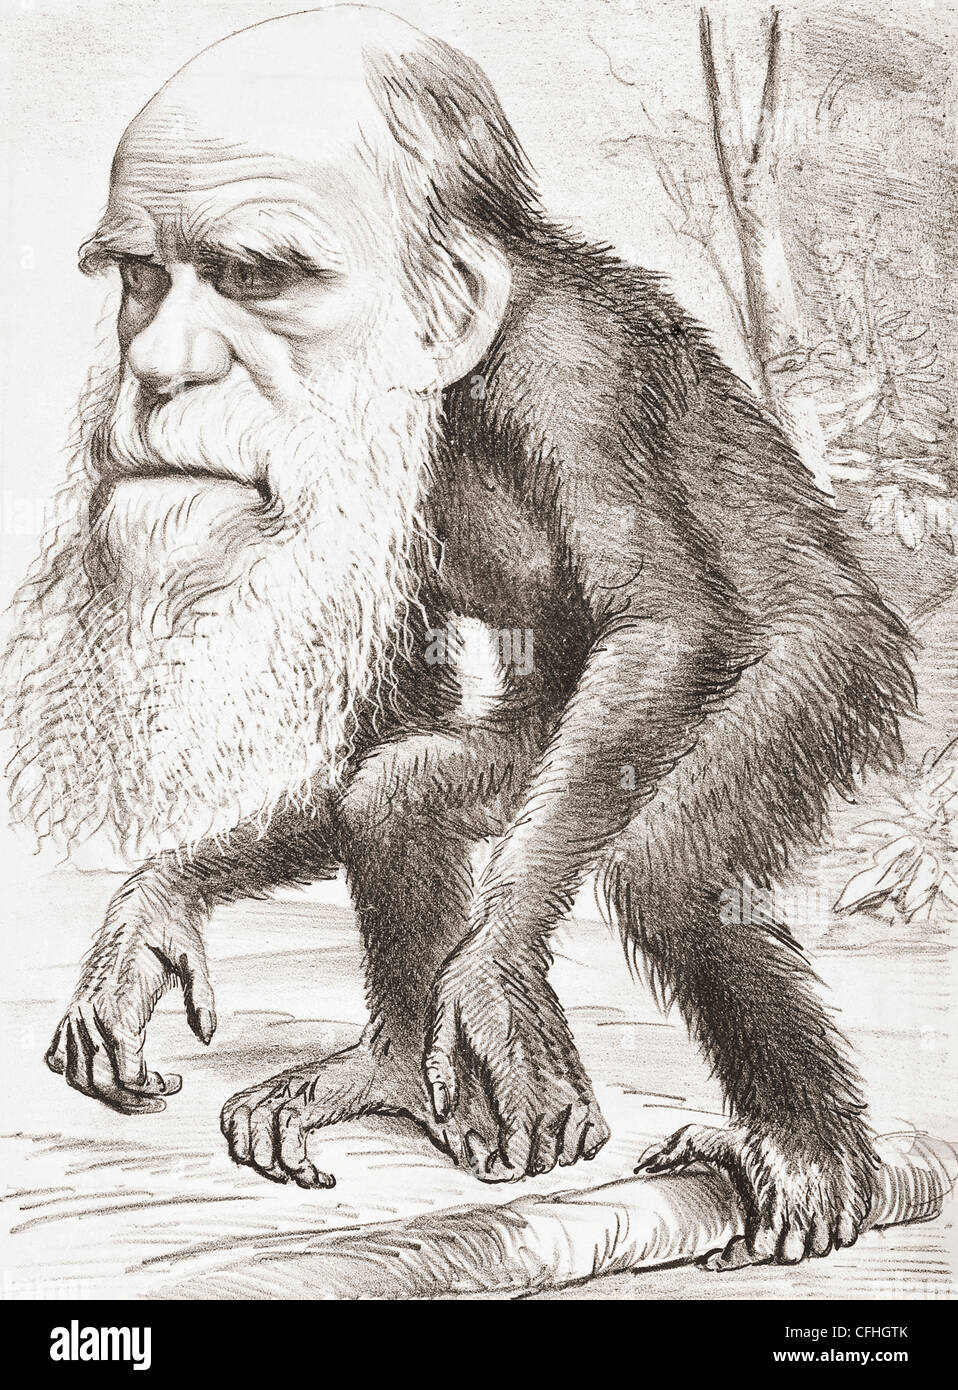 Charles Darwin 1809 - 1882. English naturalist here portrayed as an ape in a cartoon in the Hornet magazine of 22 March 1871. Stock Photo